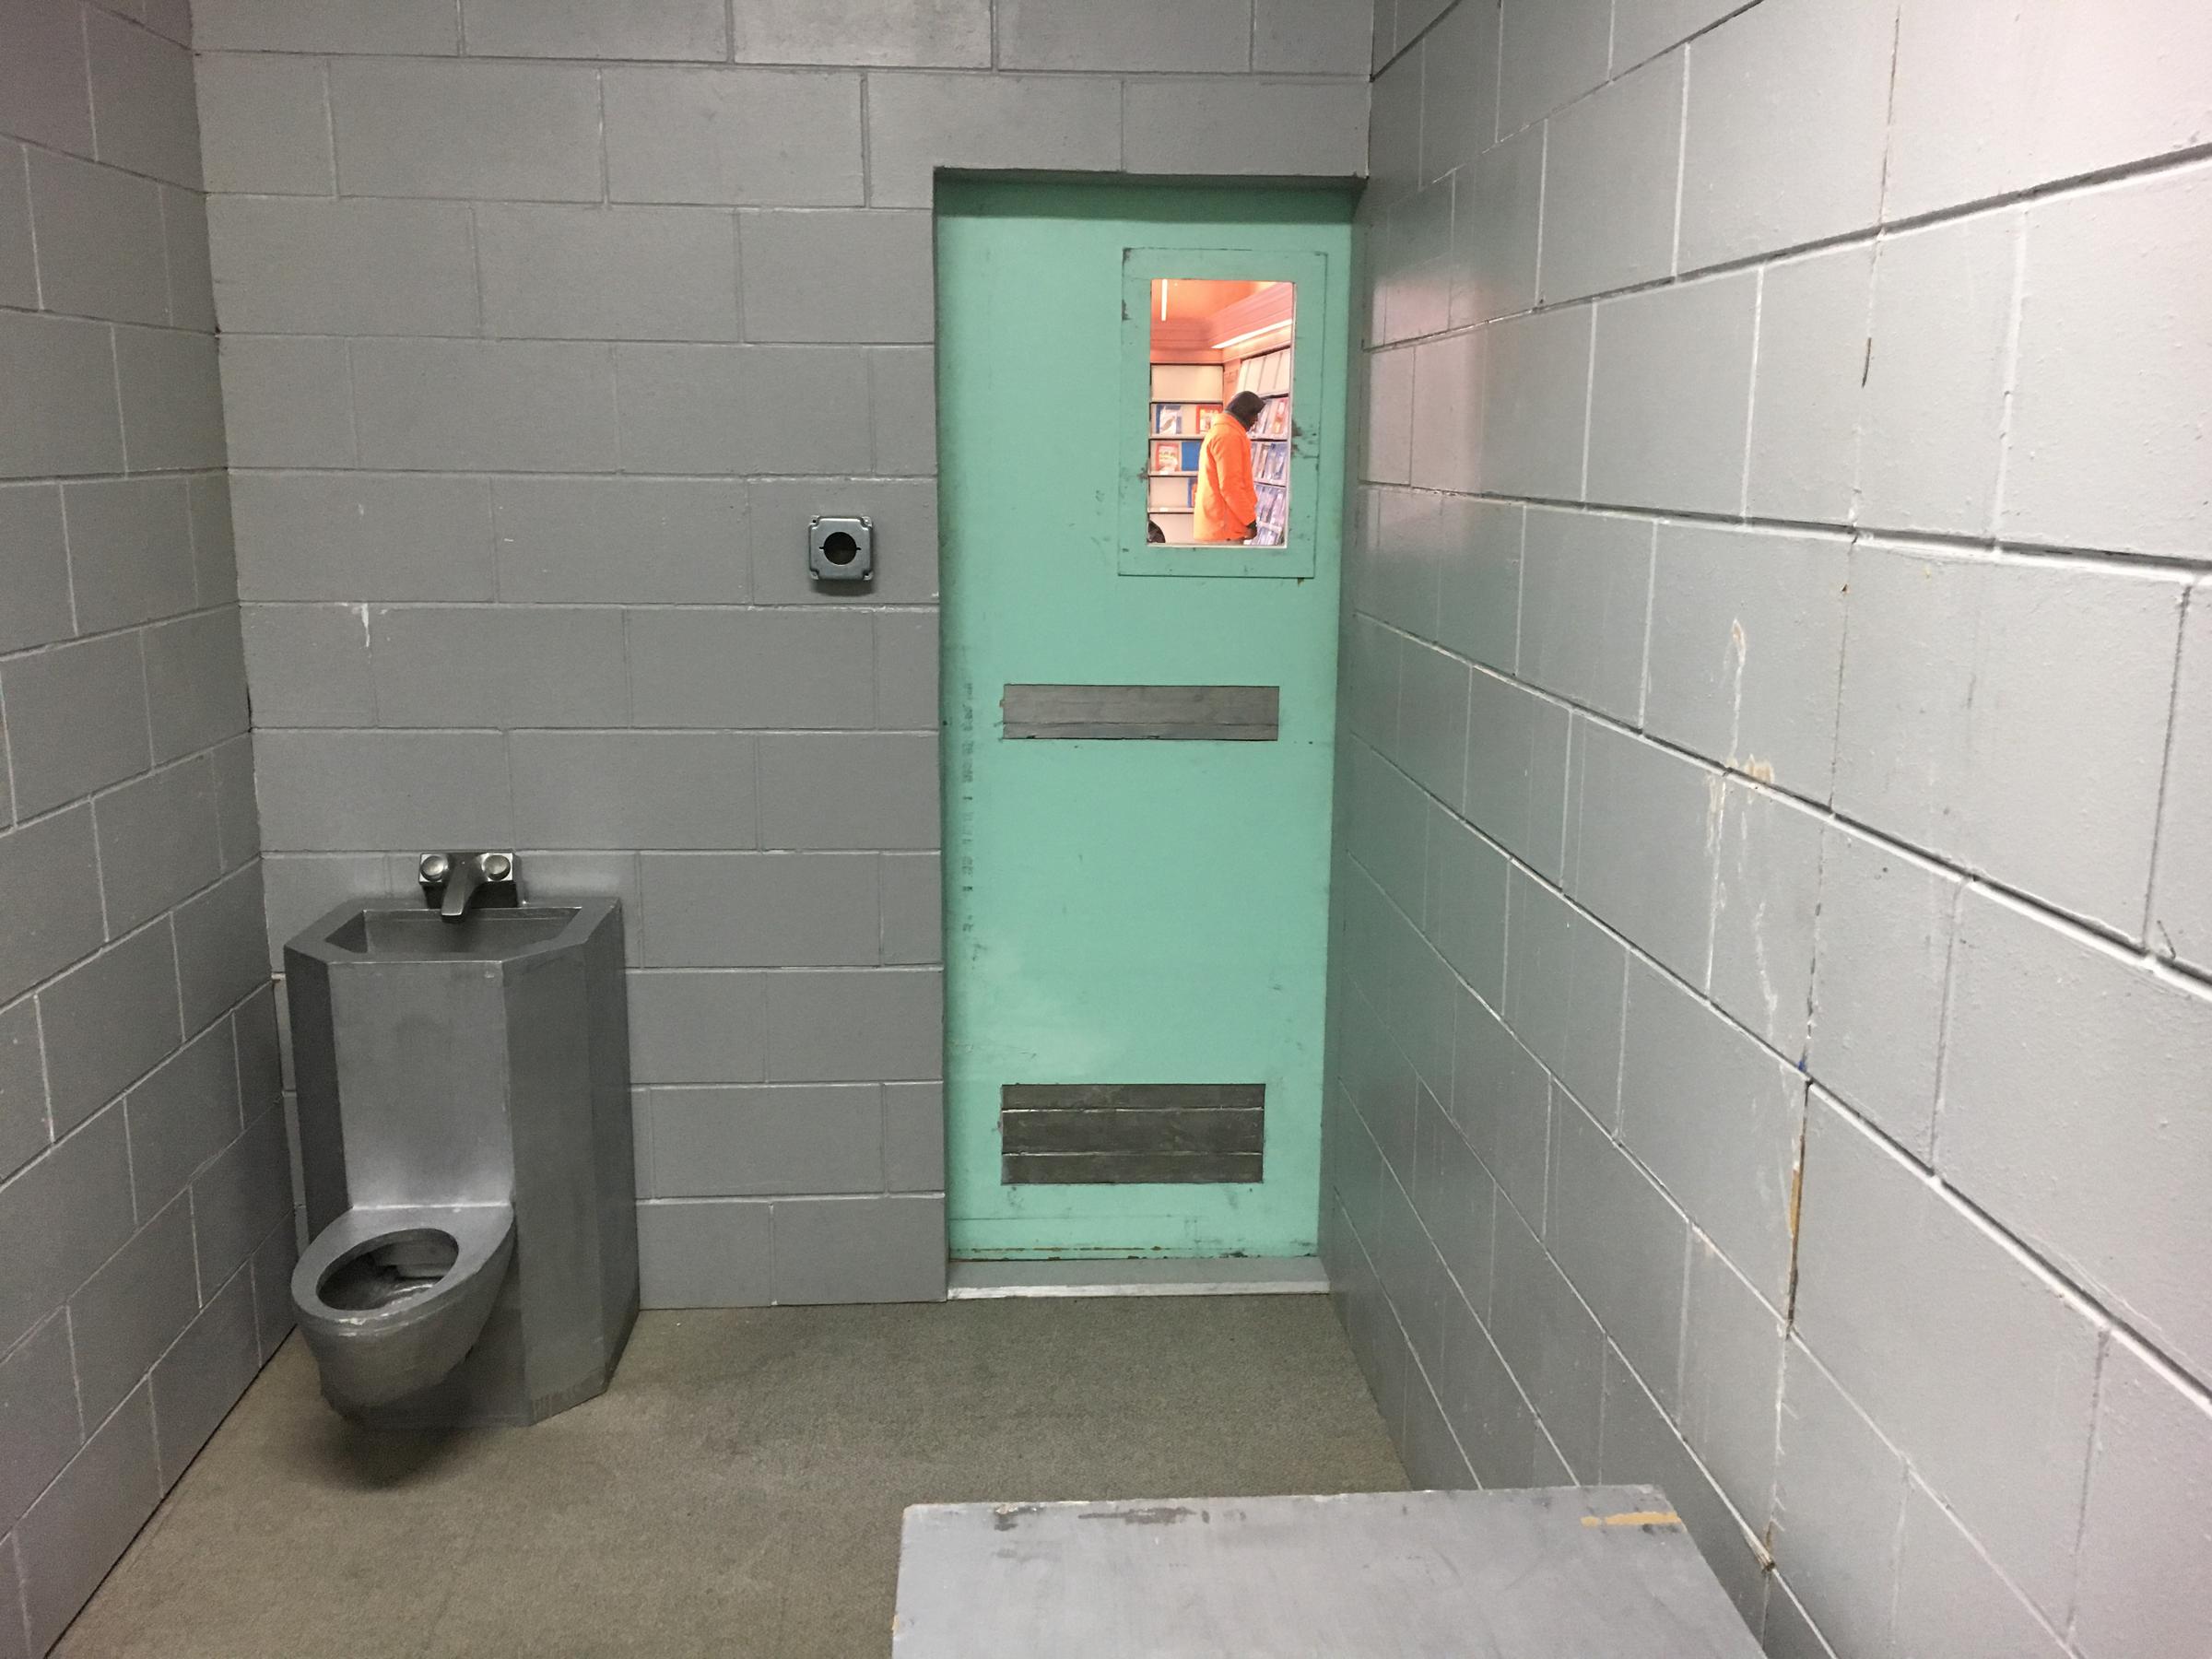 replica_solitary_confinement_cell.jpg